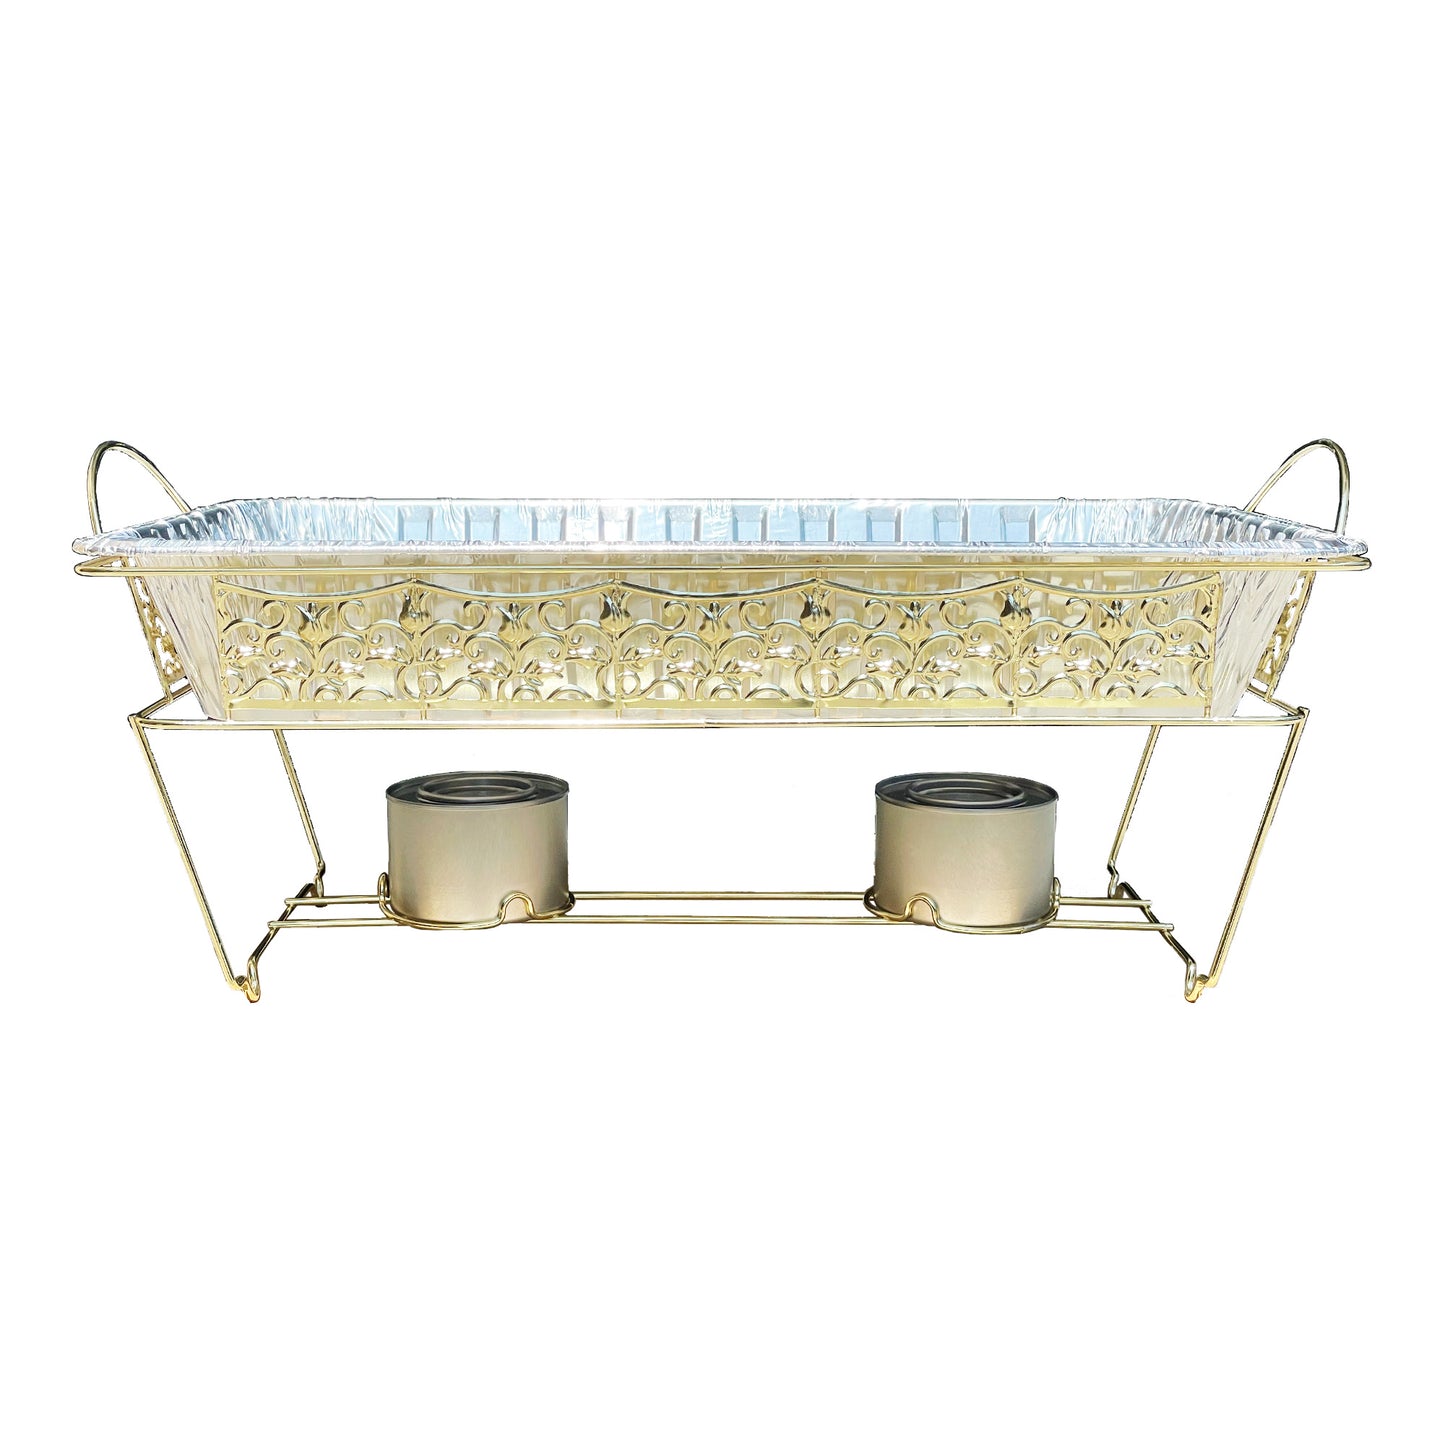 Hanna K. Signature Elements Decorative Disposable Gold Full size Chafing Rack Disposable Hanna K   